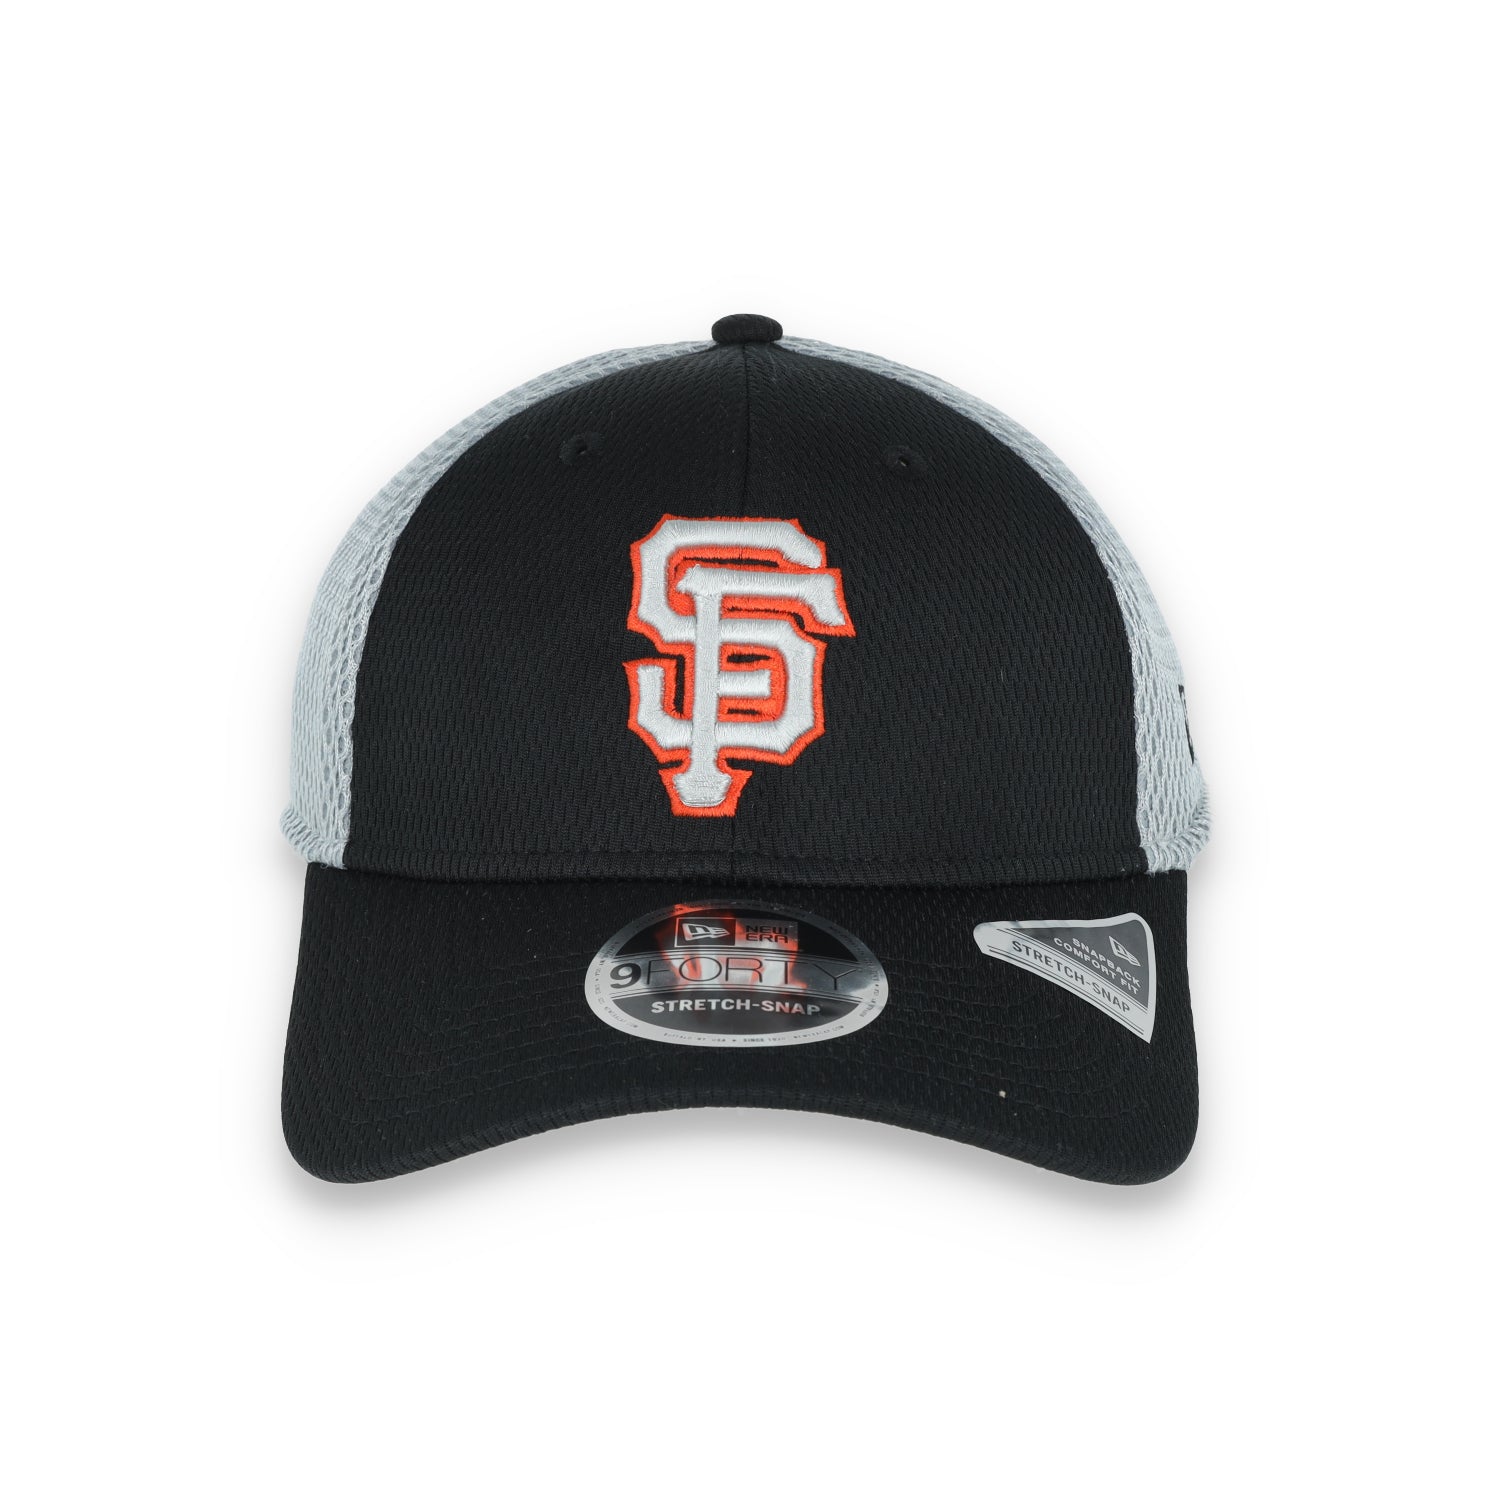 New Era San Francisco Giants Outline 9FORTY Stretch-Snap Hat